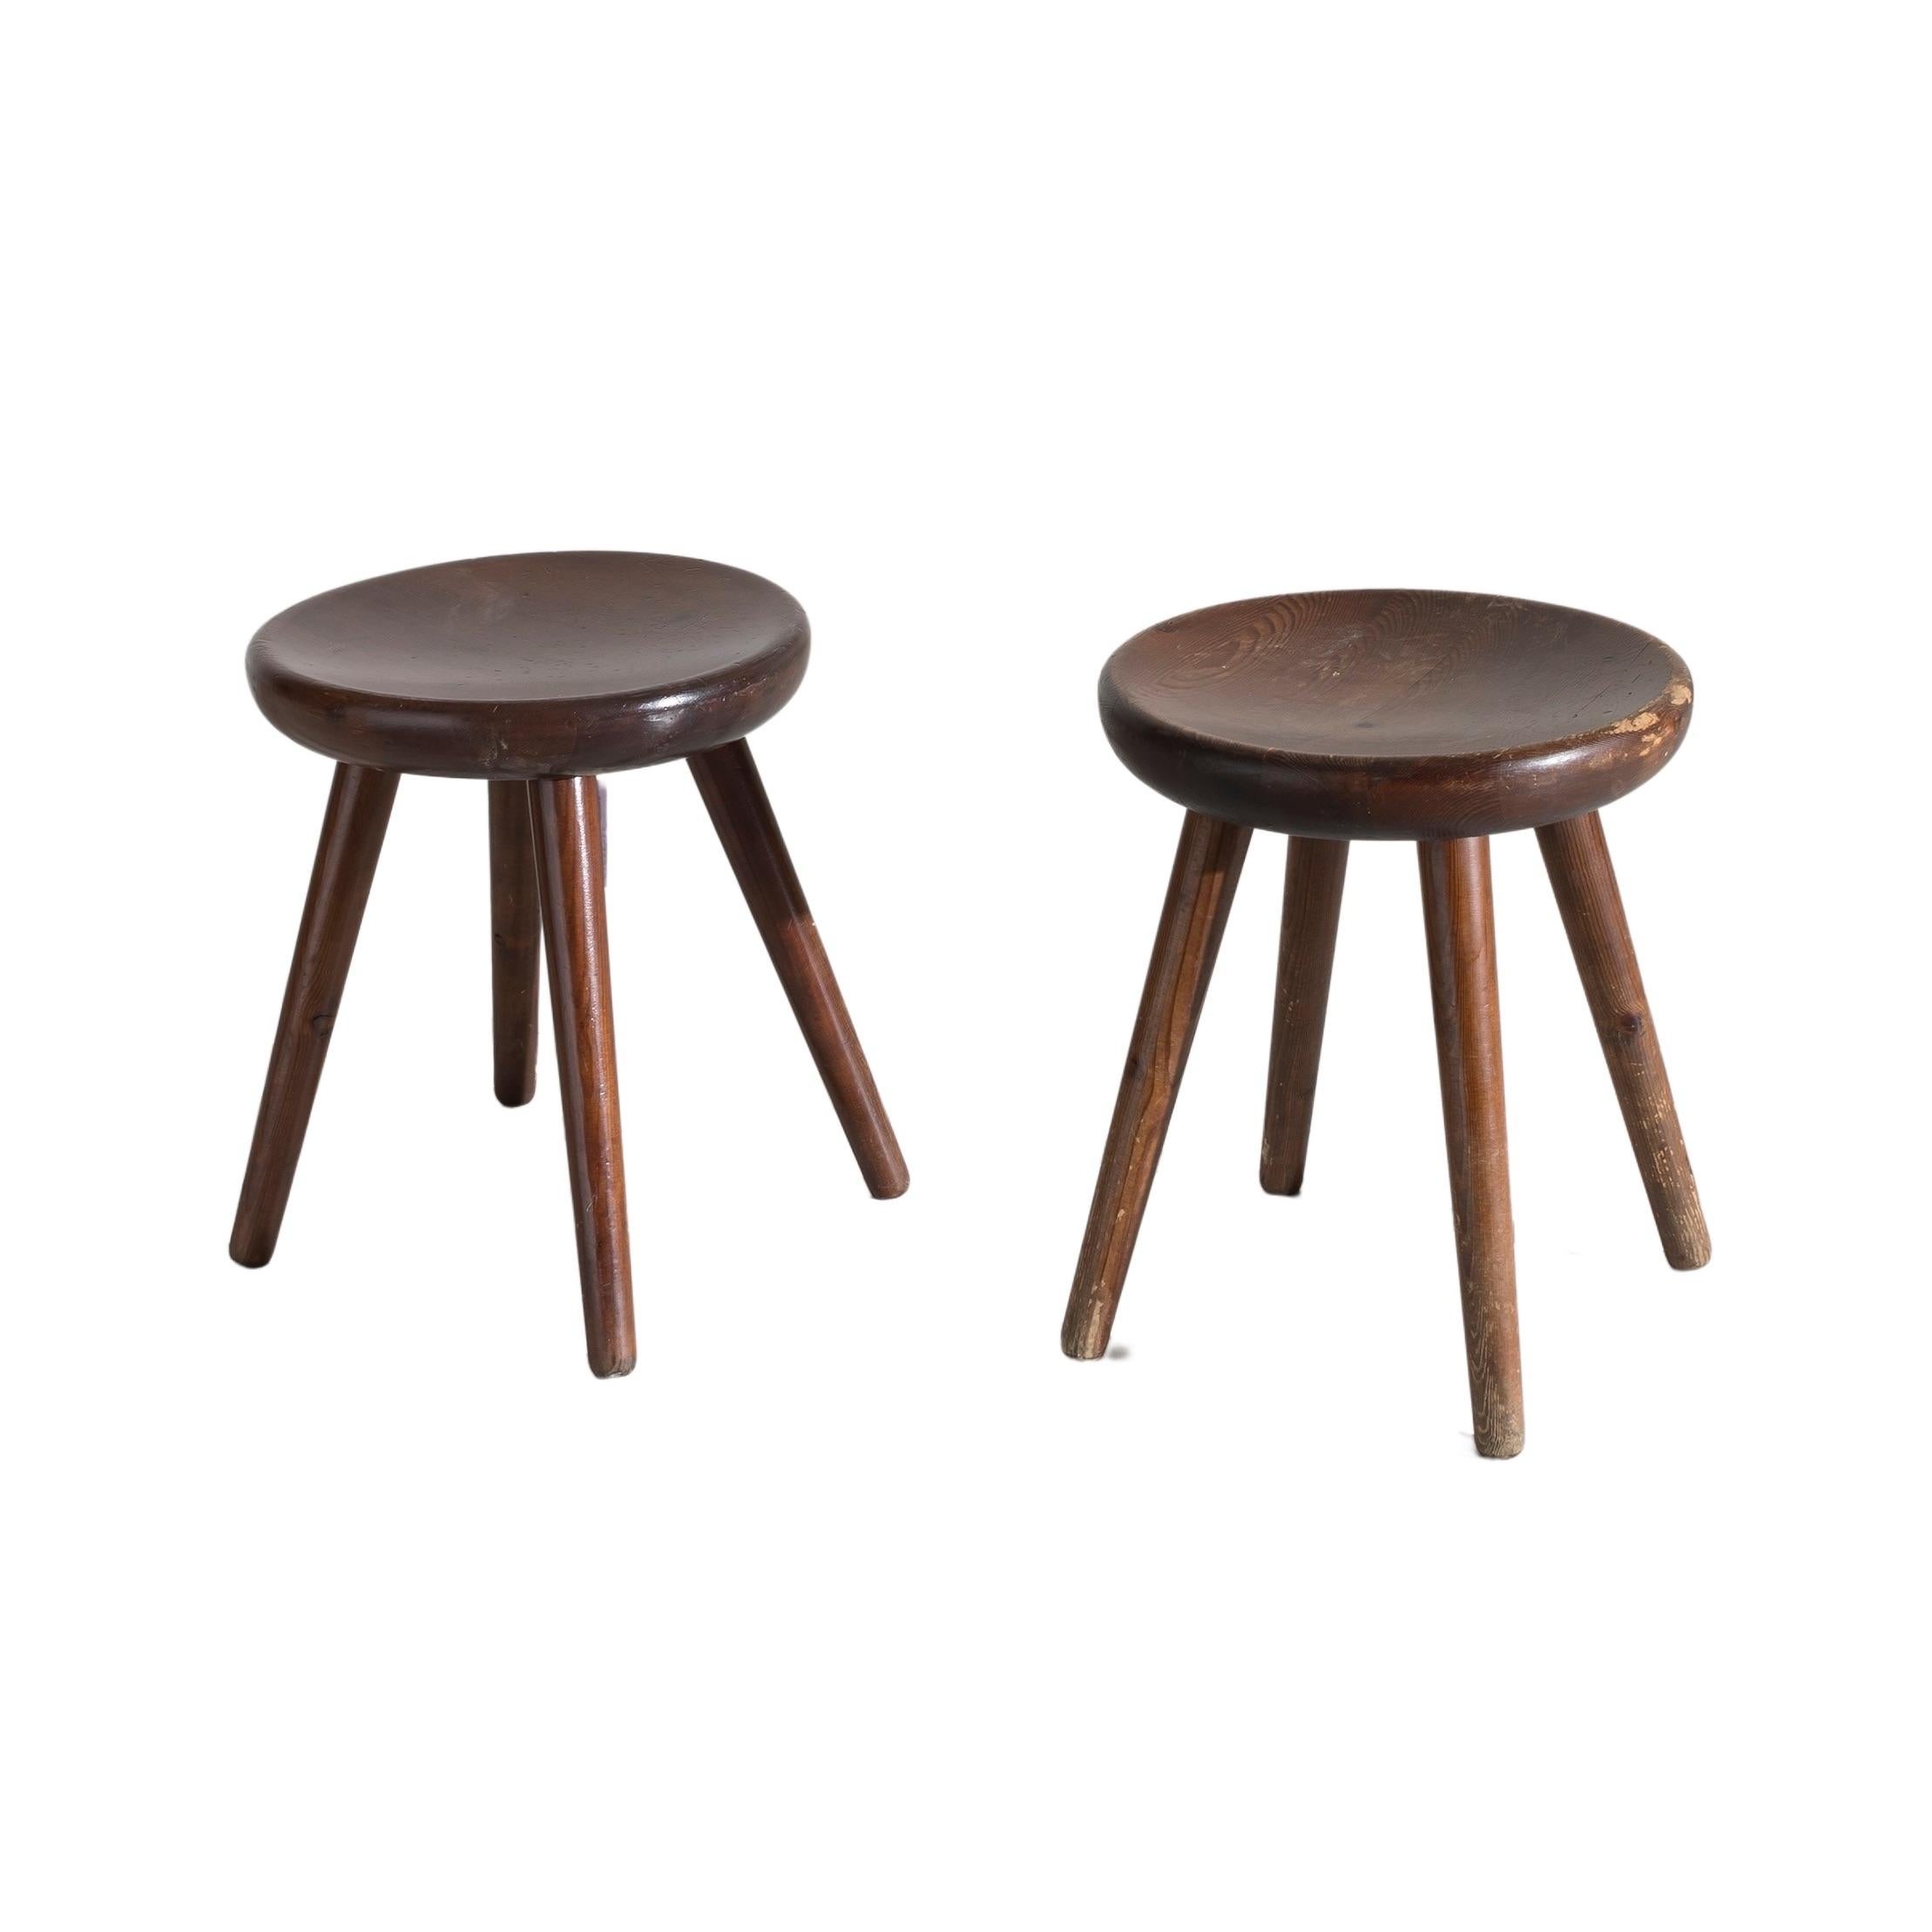 Pair of Four Legged Stools by Charlotte Perriand for Les Arcs In Good Condition For Sale In London, GB